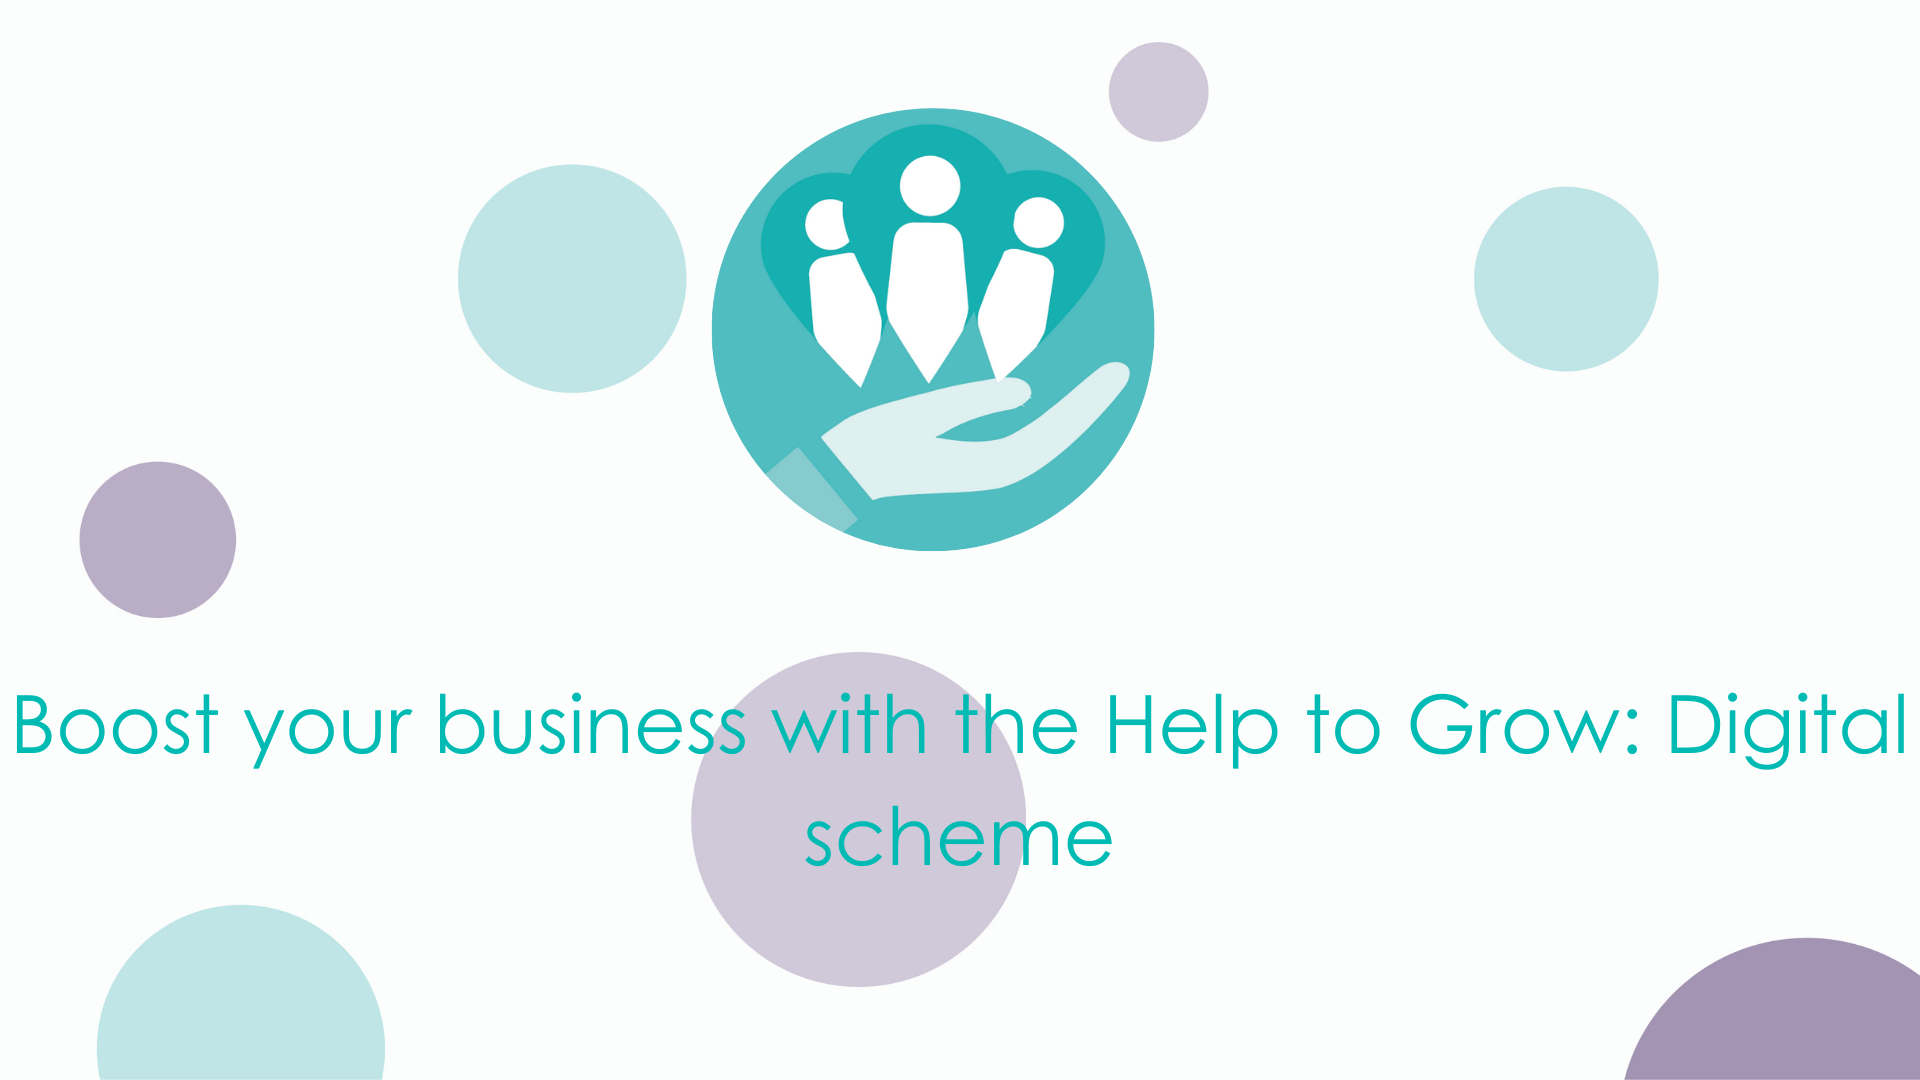 Boost your business with the Help to Grow: Digital scheme